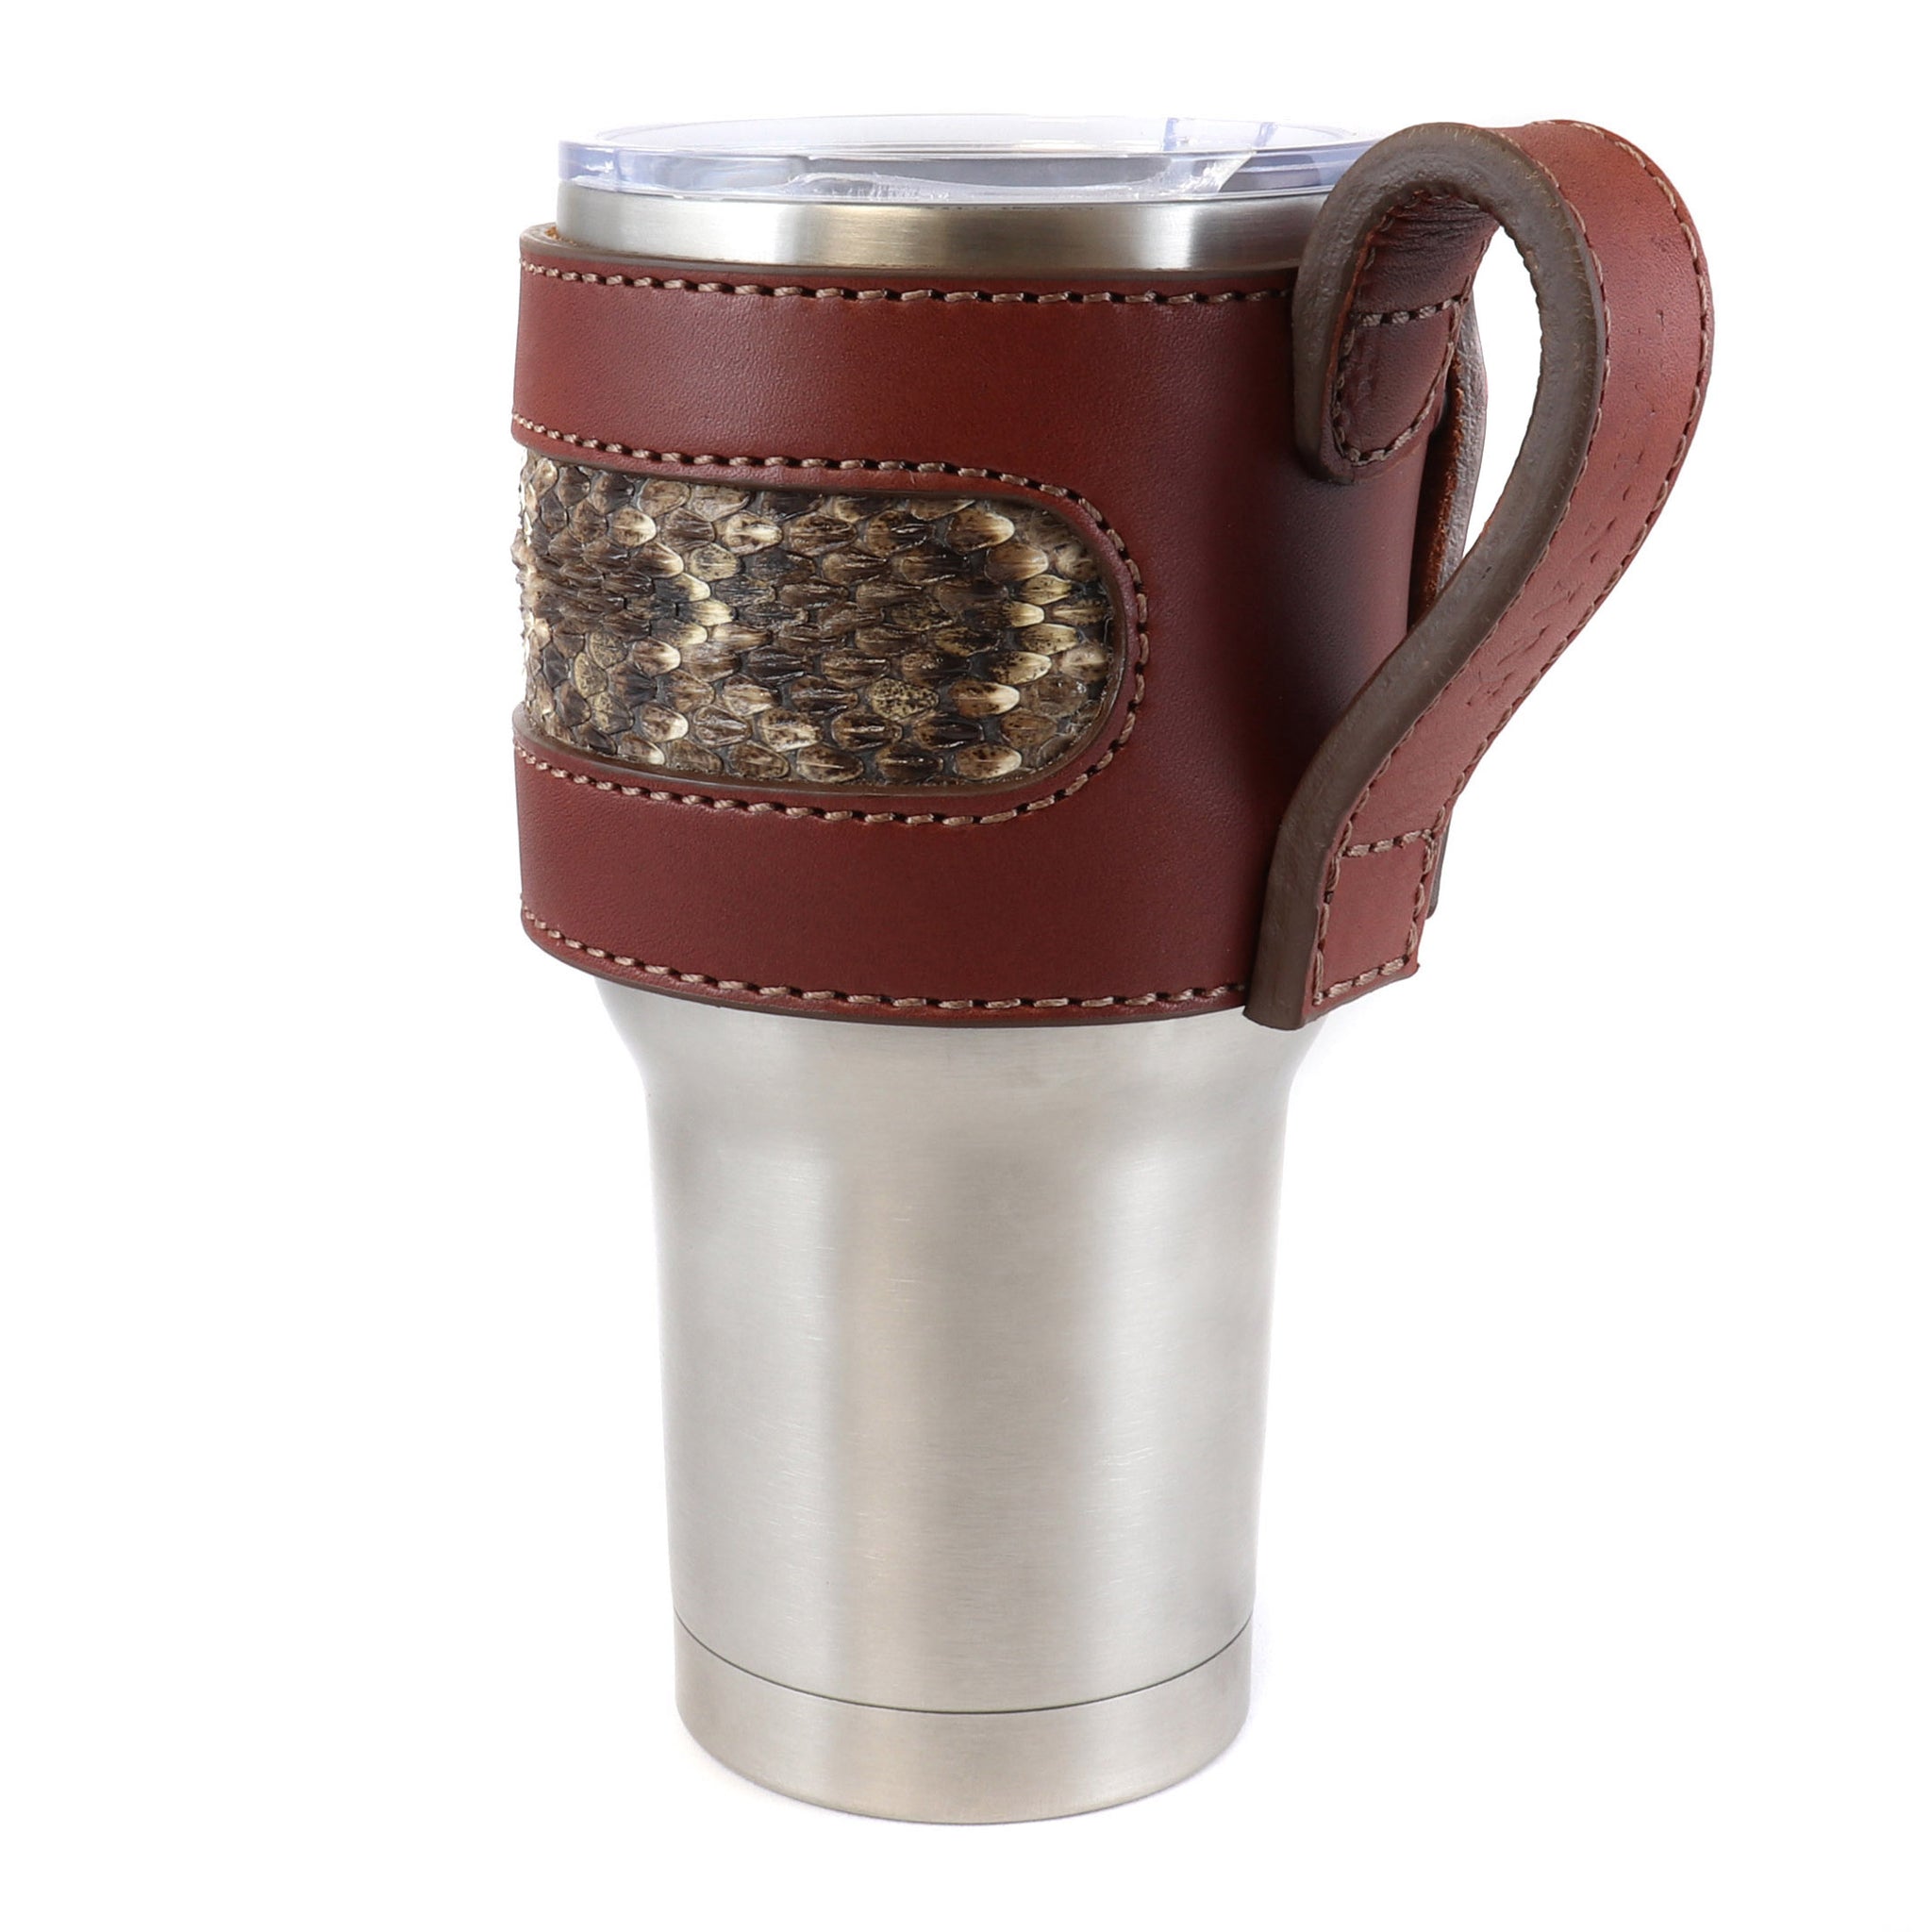 Yeti cup holders with handles - Purses, Wallets, Belts and Miscellaneous  Pocket Items 